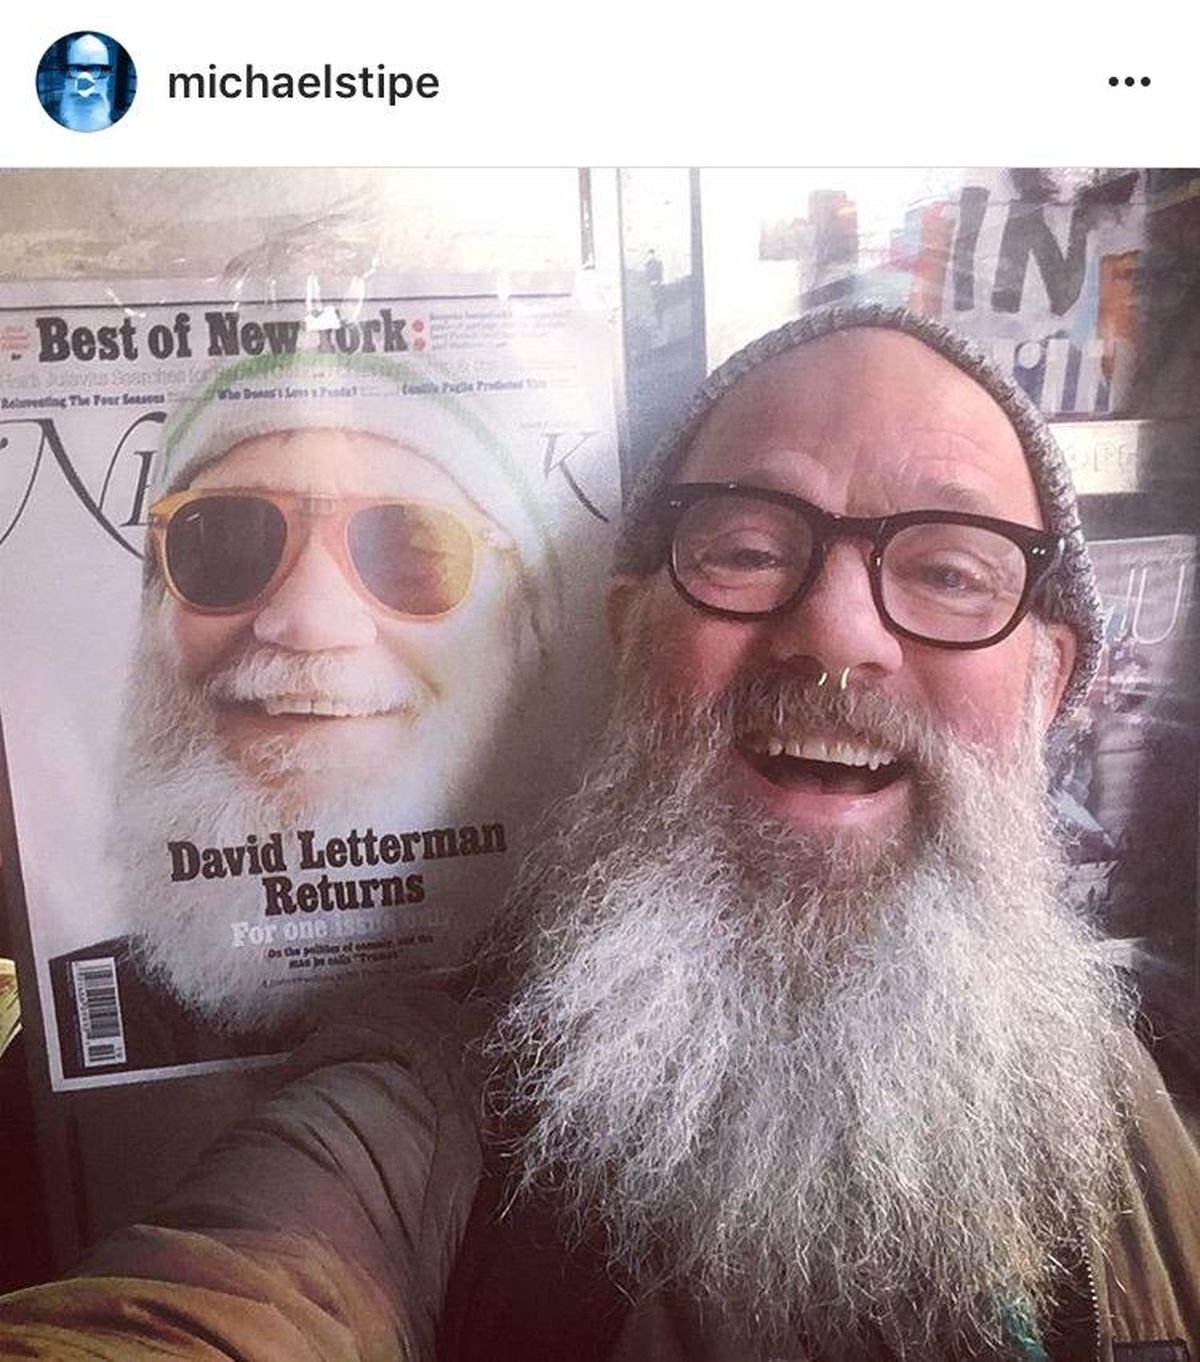 Former R.E.M. singer Michael Stipe posted this image on Tuesday of himself posting with a magazine image of David Letterman.